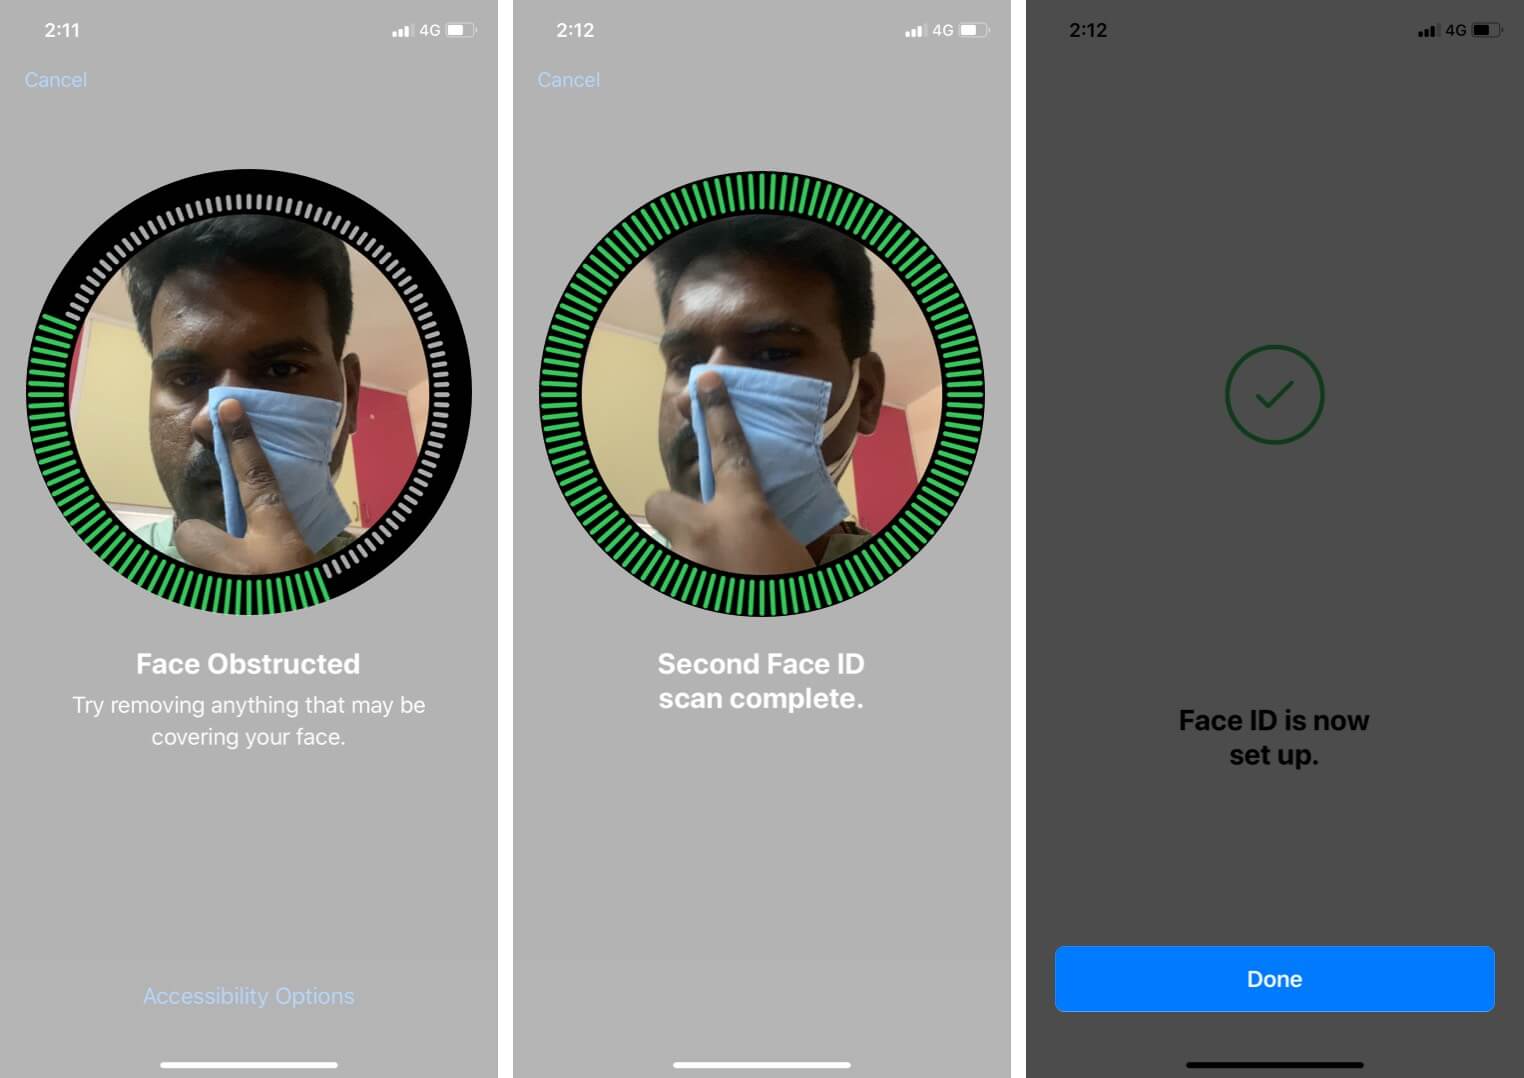 Tap on Done to Set up iPhone Face ID with Mask